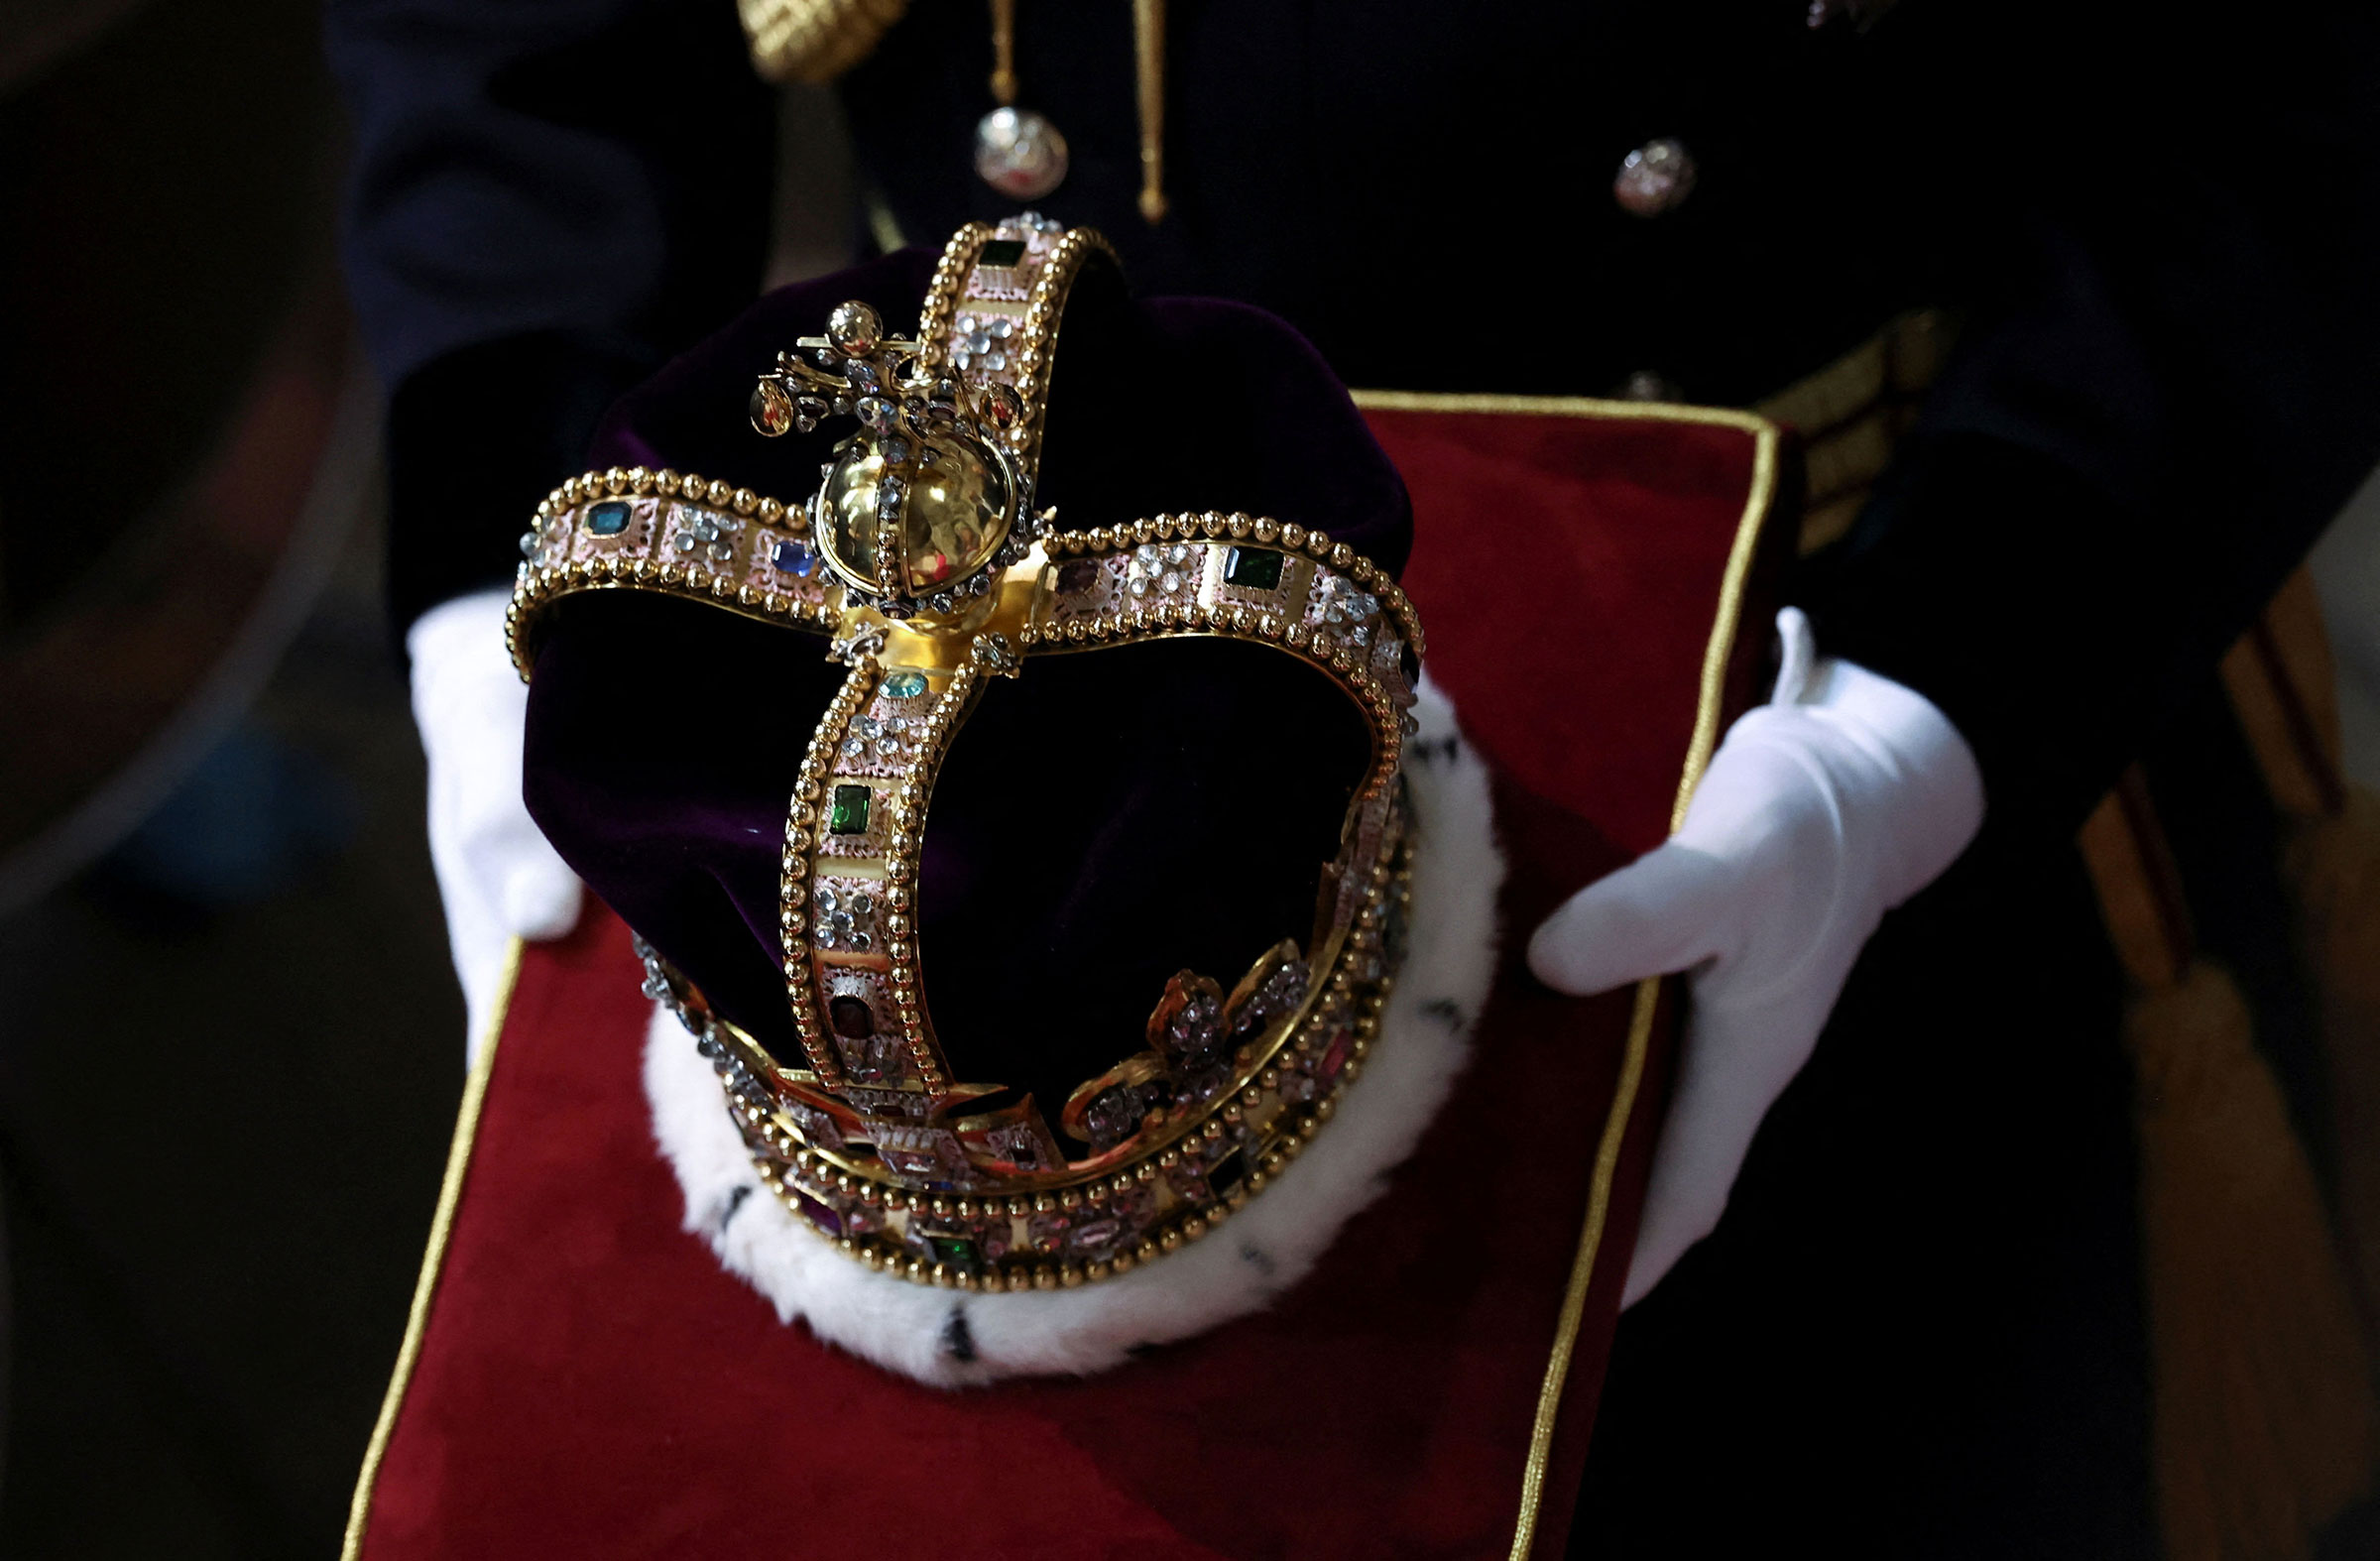 17th Century St Edward's Crown is carried ahead of the Coronation of King Charles III and Queen Camilla. (Phil Noble—WPA Pool/Getty Images)